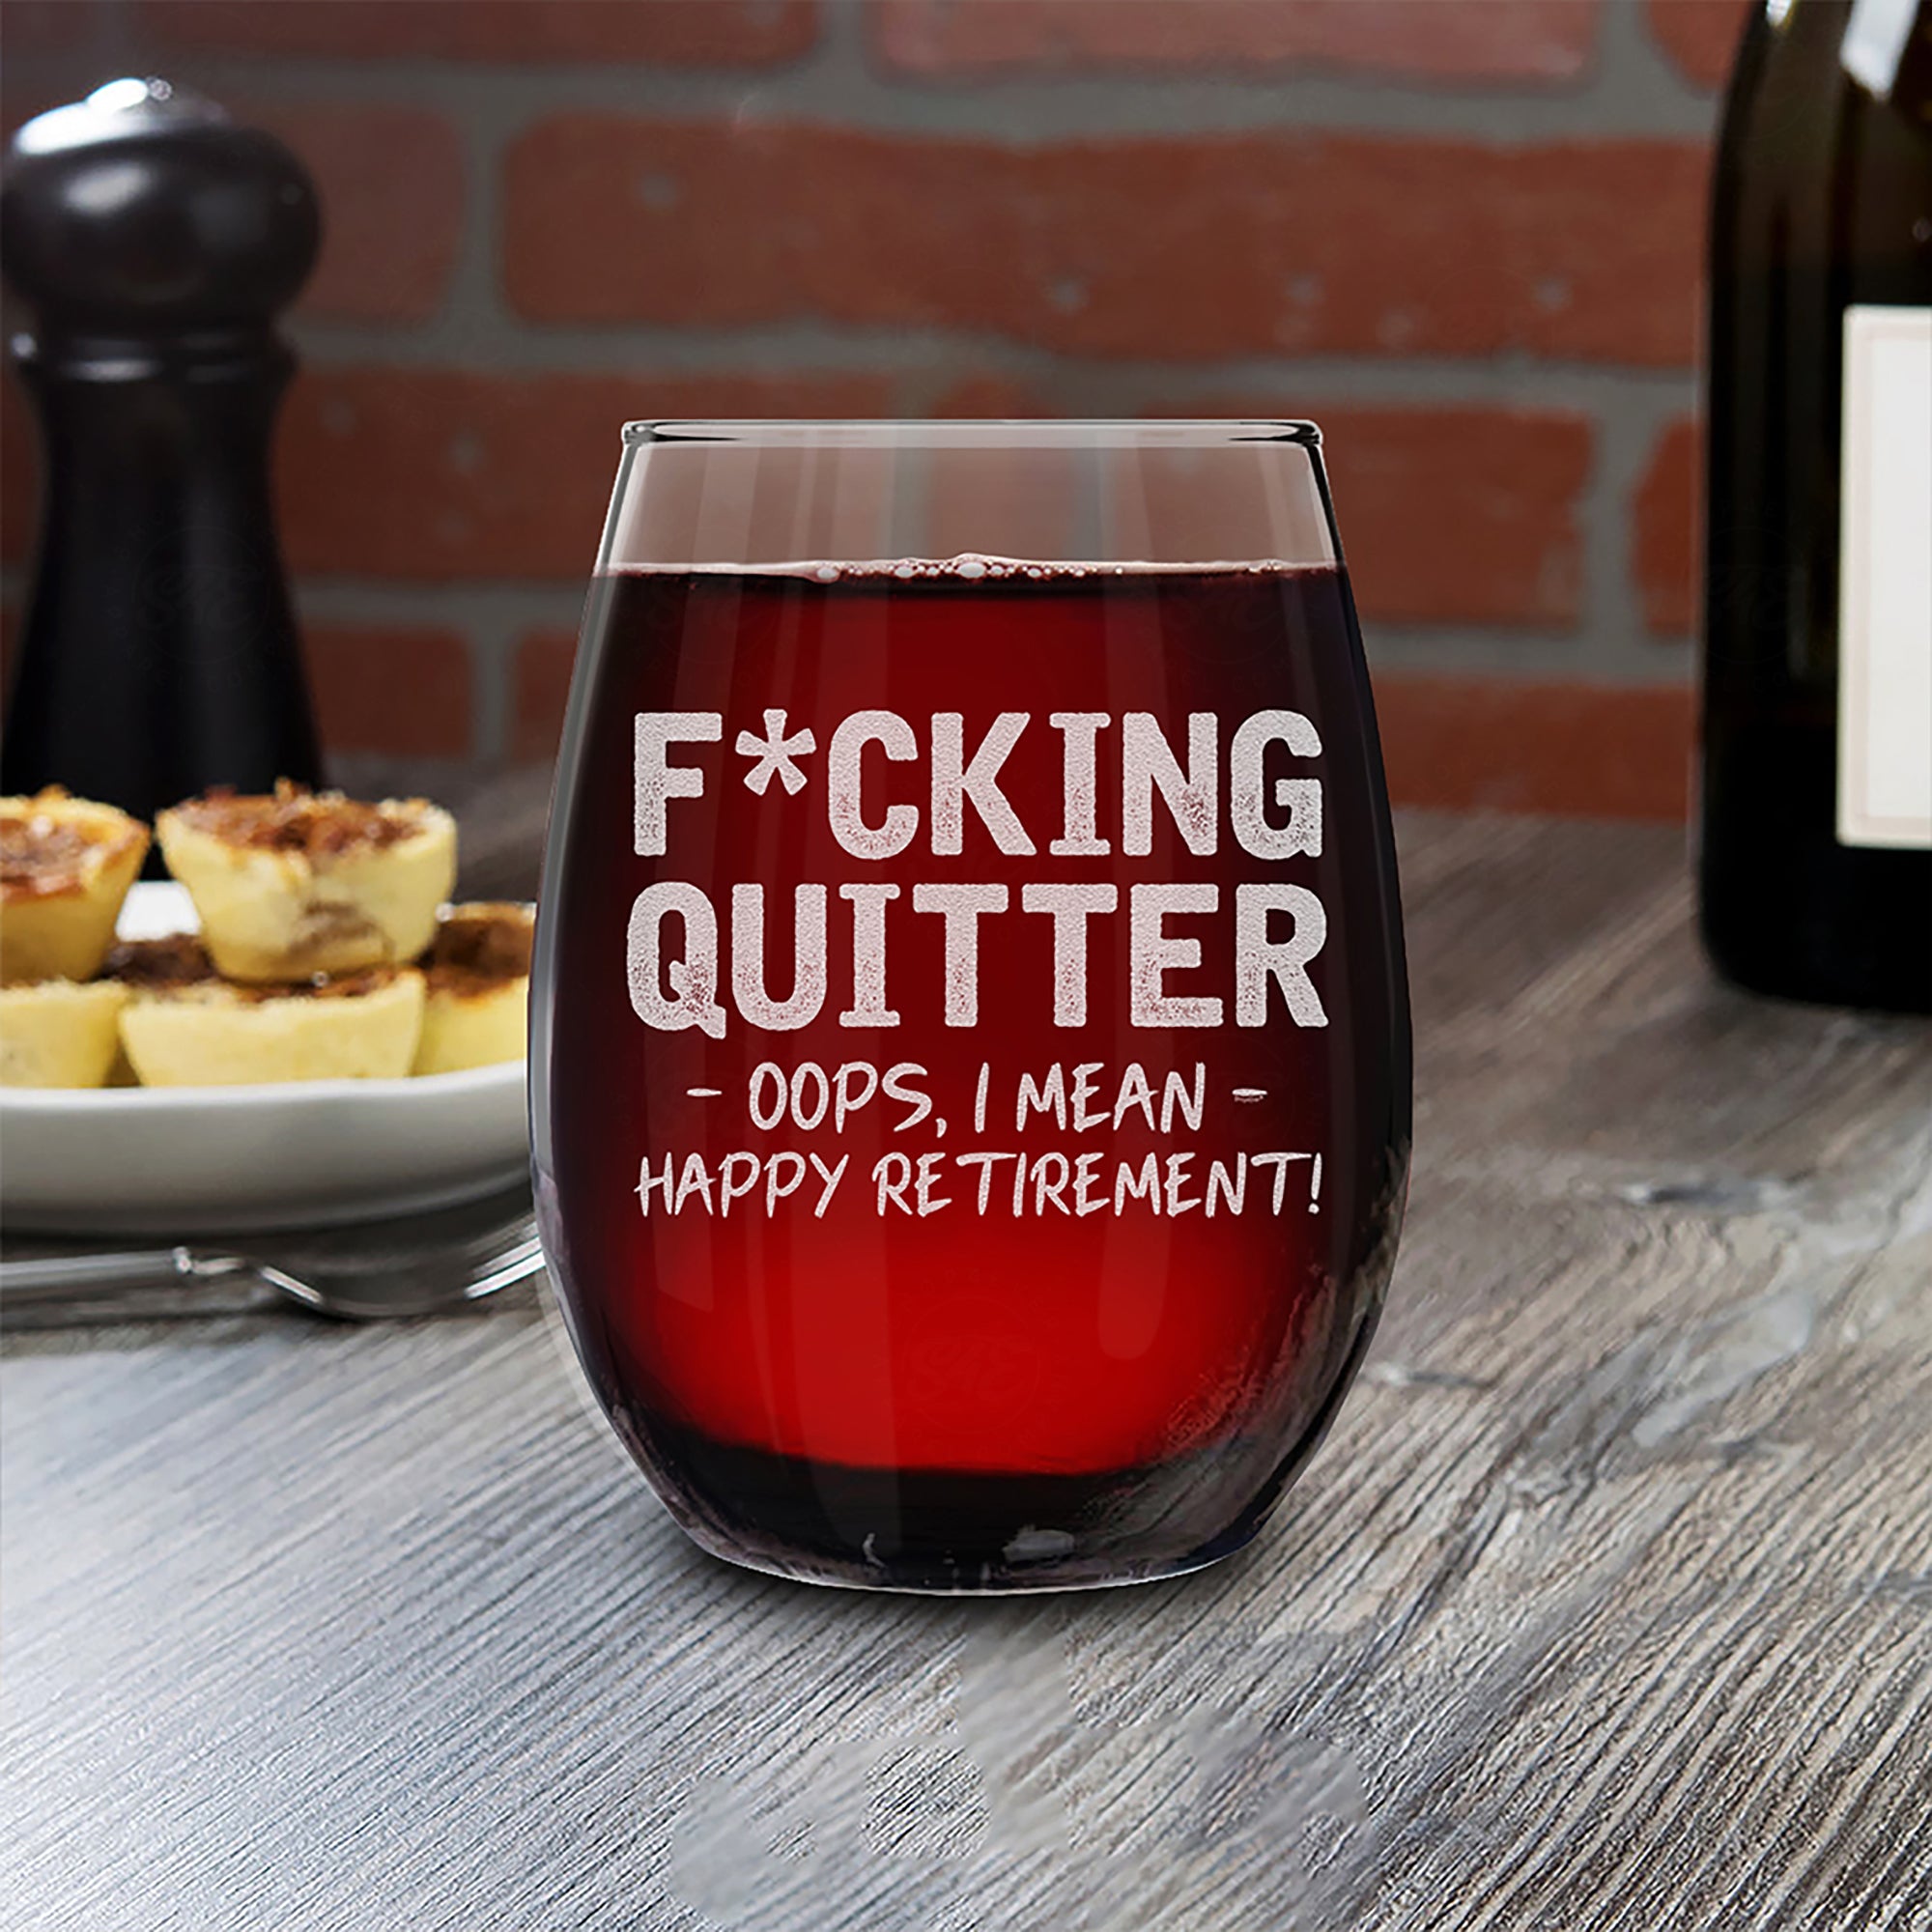 Quitter Oops, I Mean Happy Retirement! Engraved Stemless Wine Glass Funny Retirement Glass